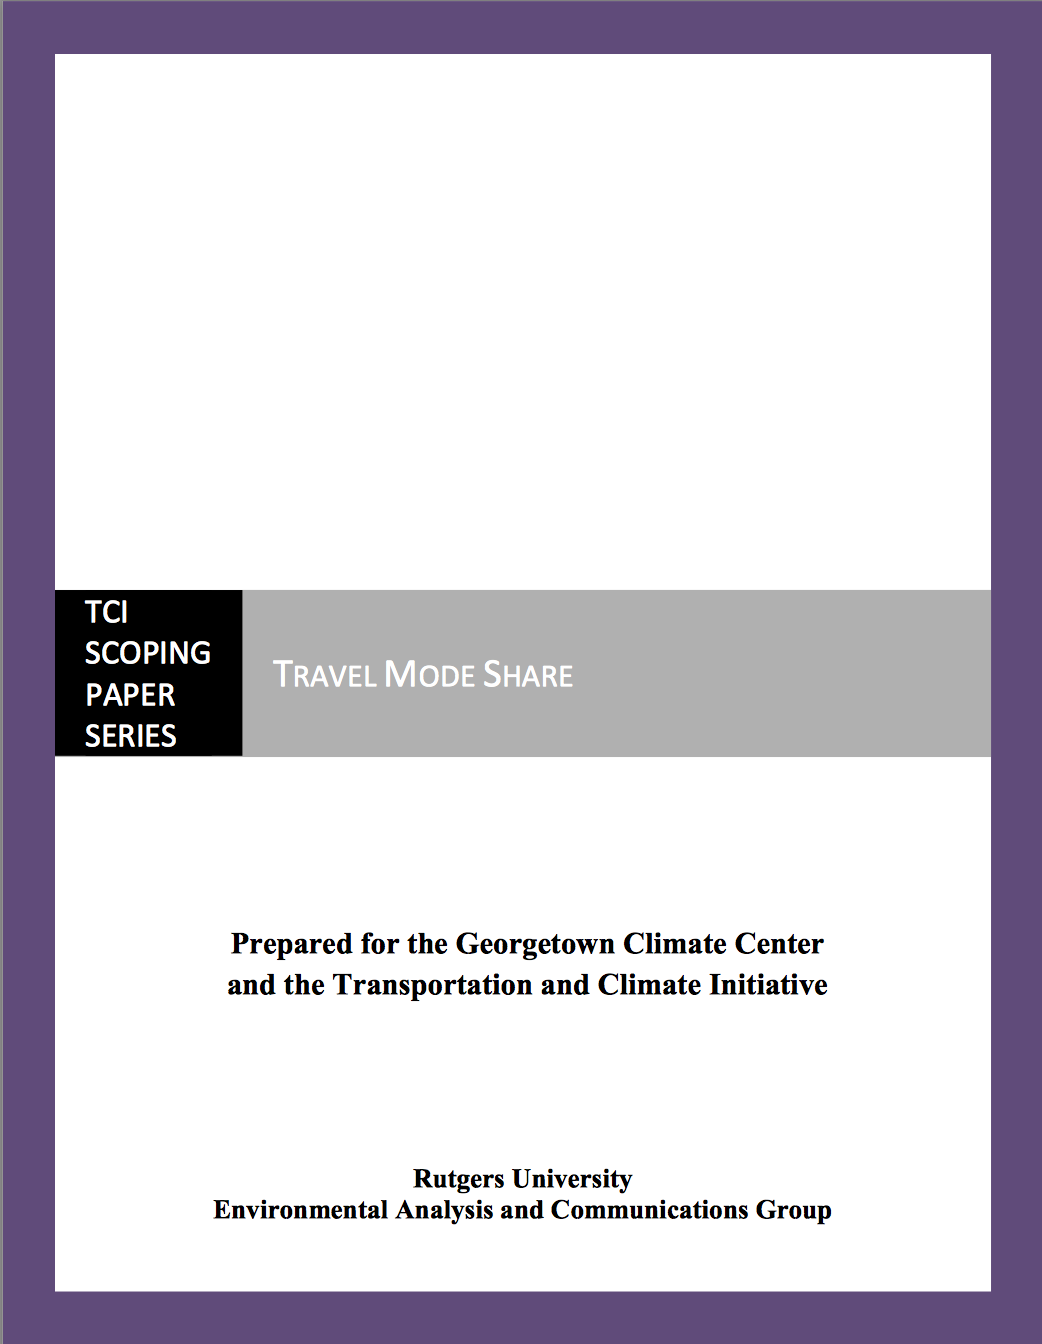 Sustainable Communities Indicators Research Paper Series: Travel Mode Share